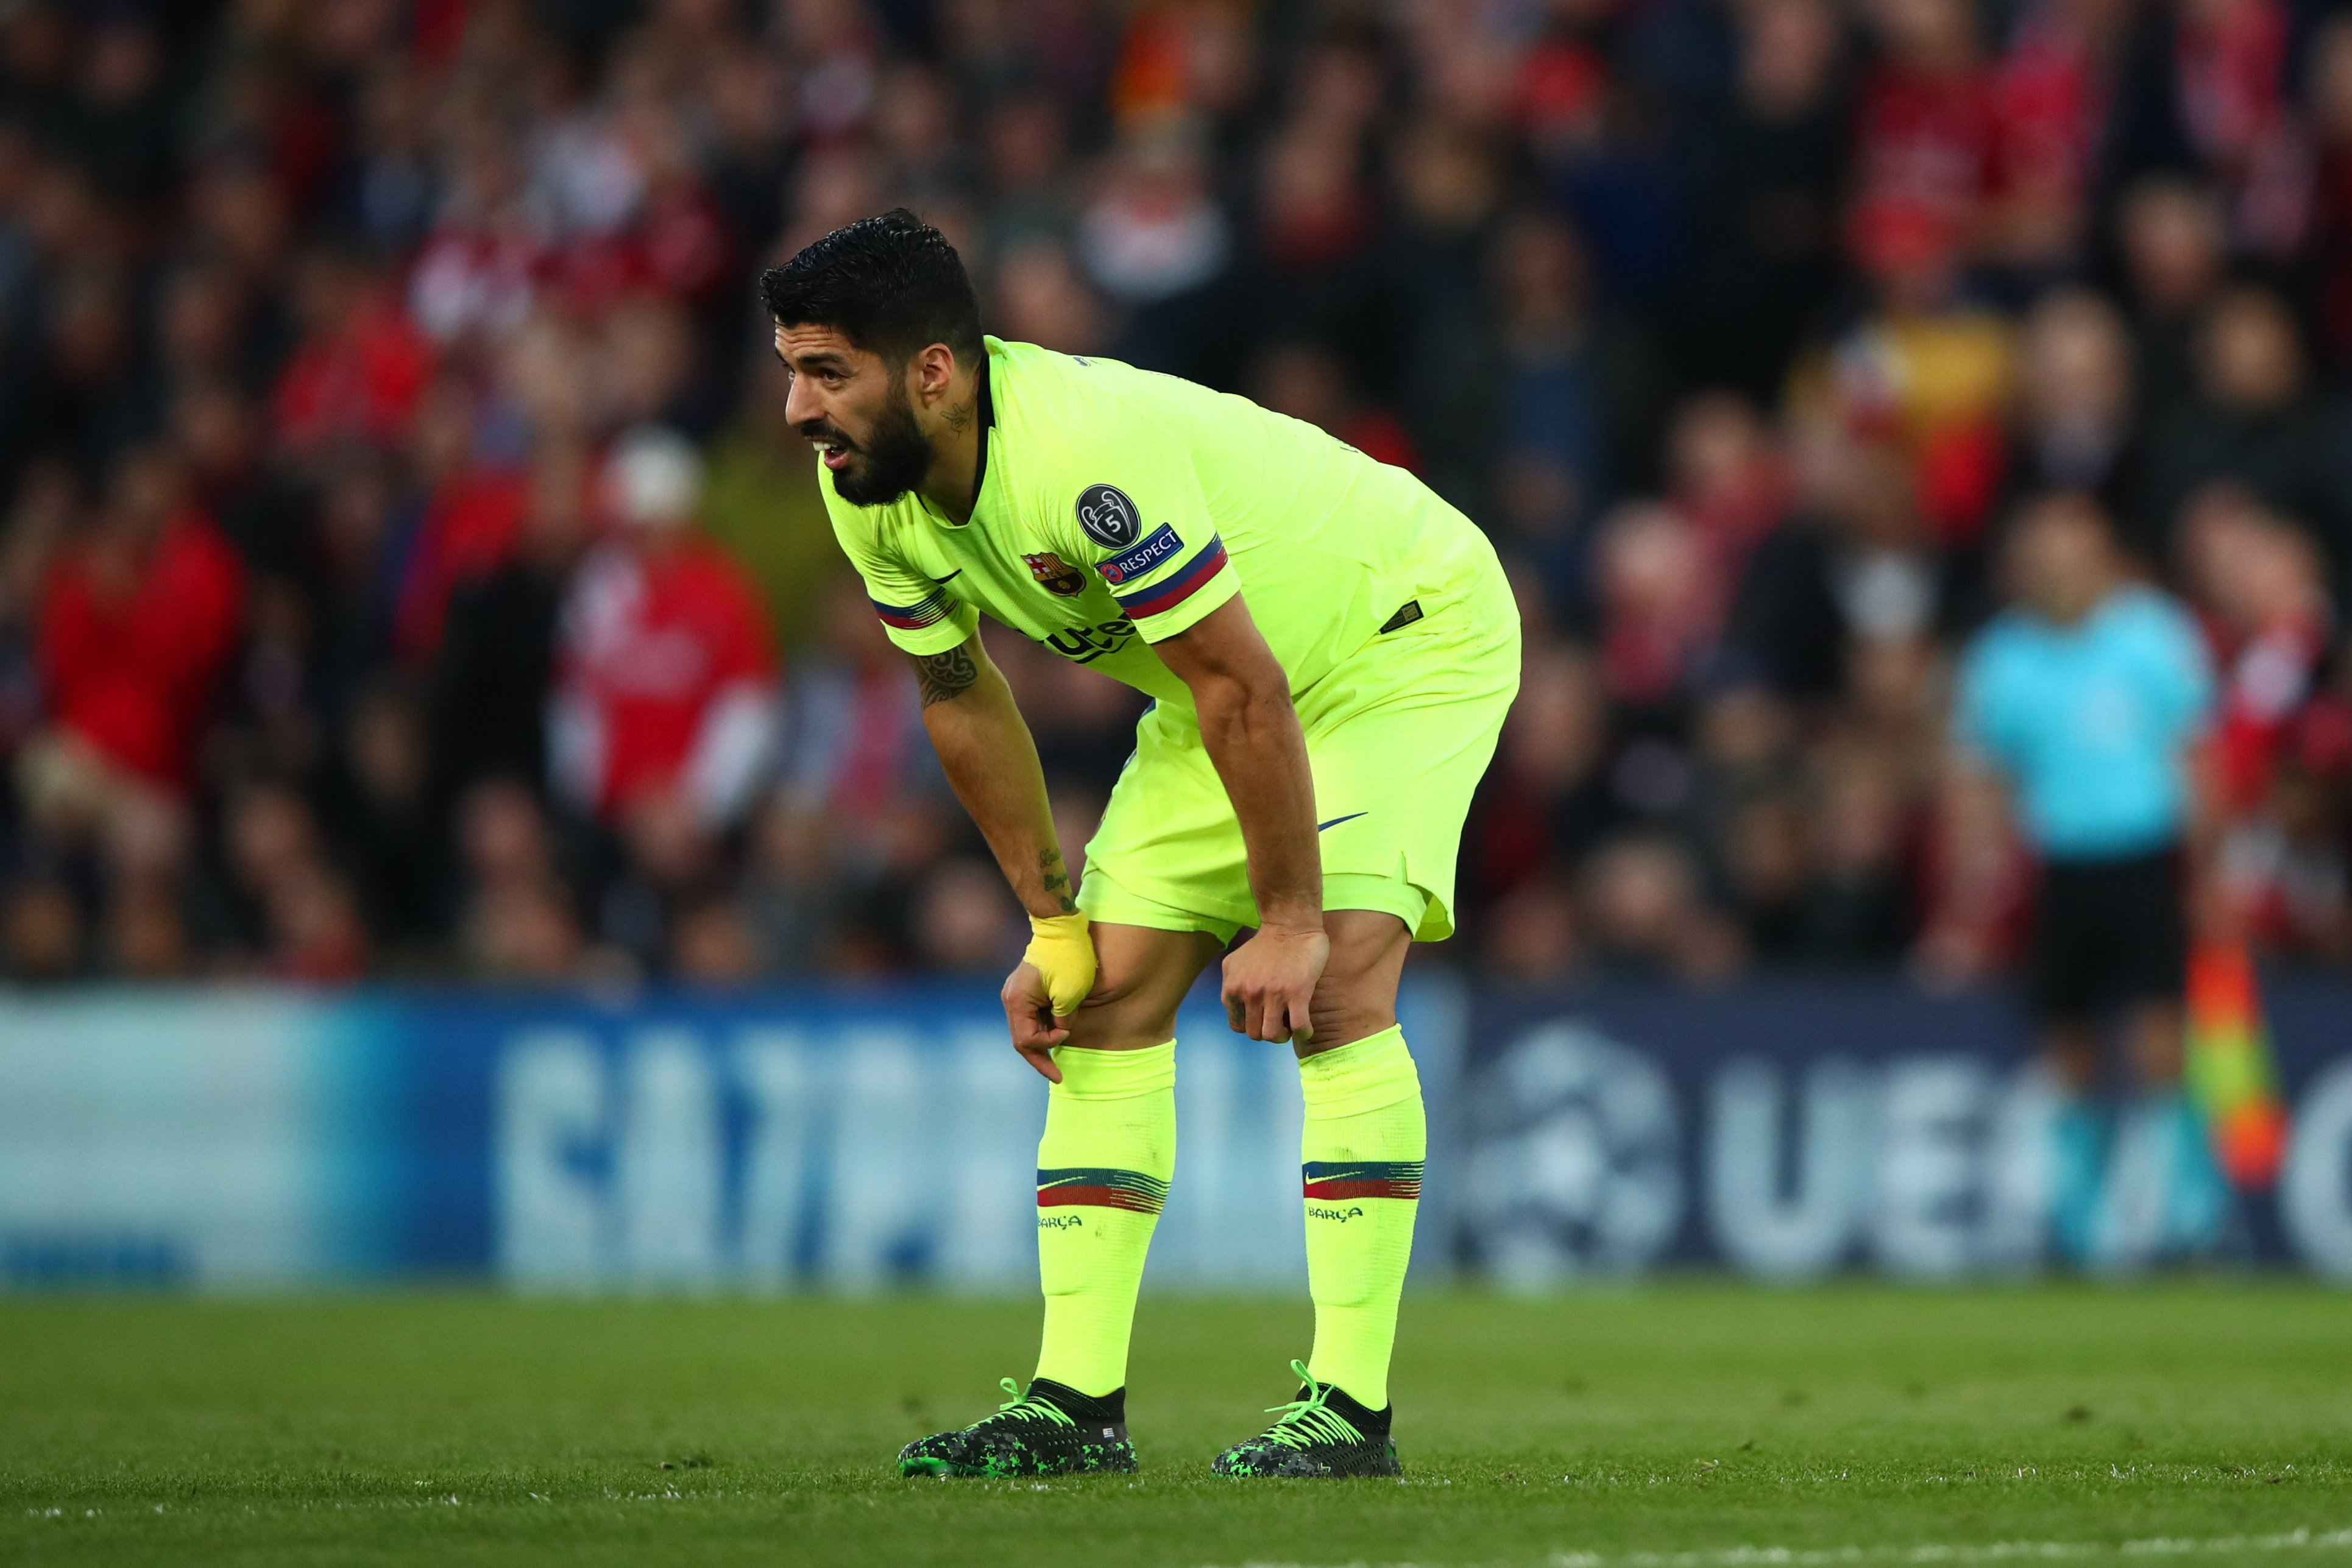 REVEALED: Suarez begged officials to disallow Origi’s goal in Barca’s defeat to Liverpool